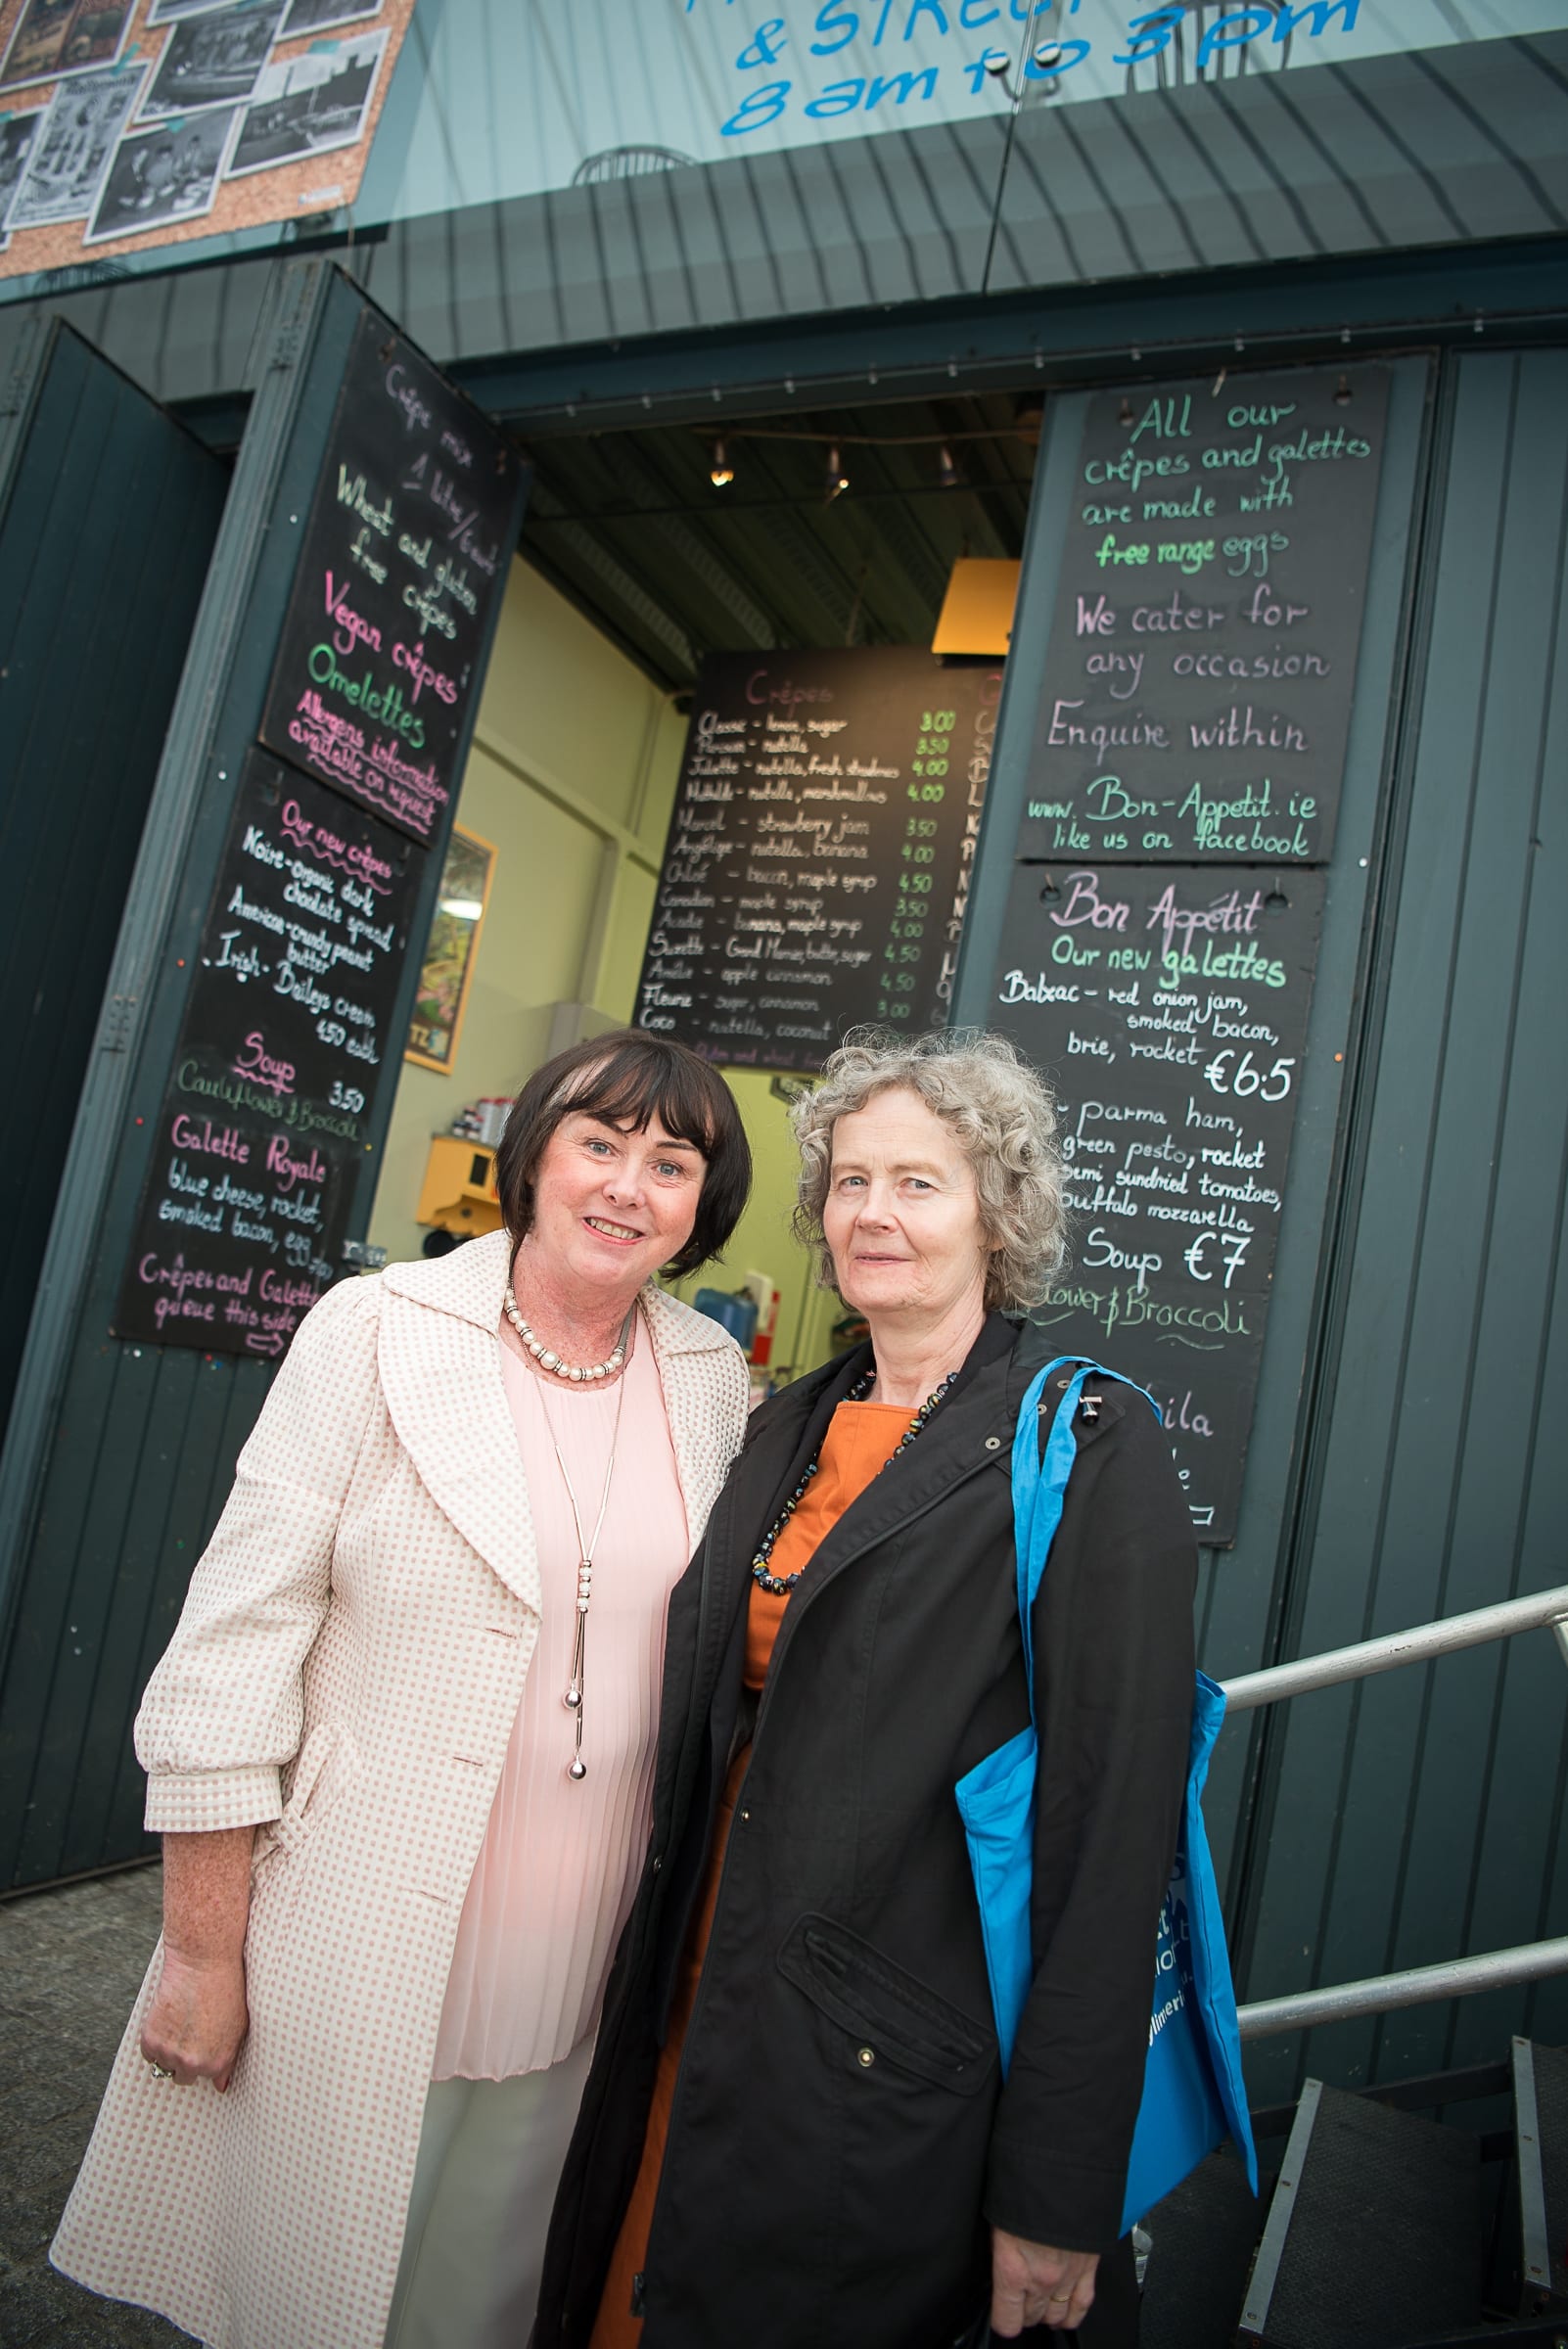 From Left to Right:  Regional Leaders BBQ which took place on the 6th June in the Limerick Milk Market:  Caroline Long - CEO/  - Limerick and  District Credit Union, Anne Peters - Limerick City and County Council. 
Photo by Morning Star Photography